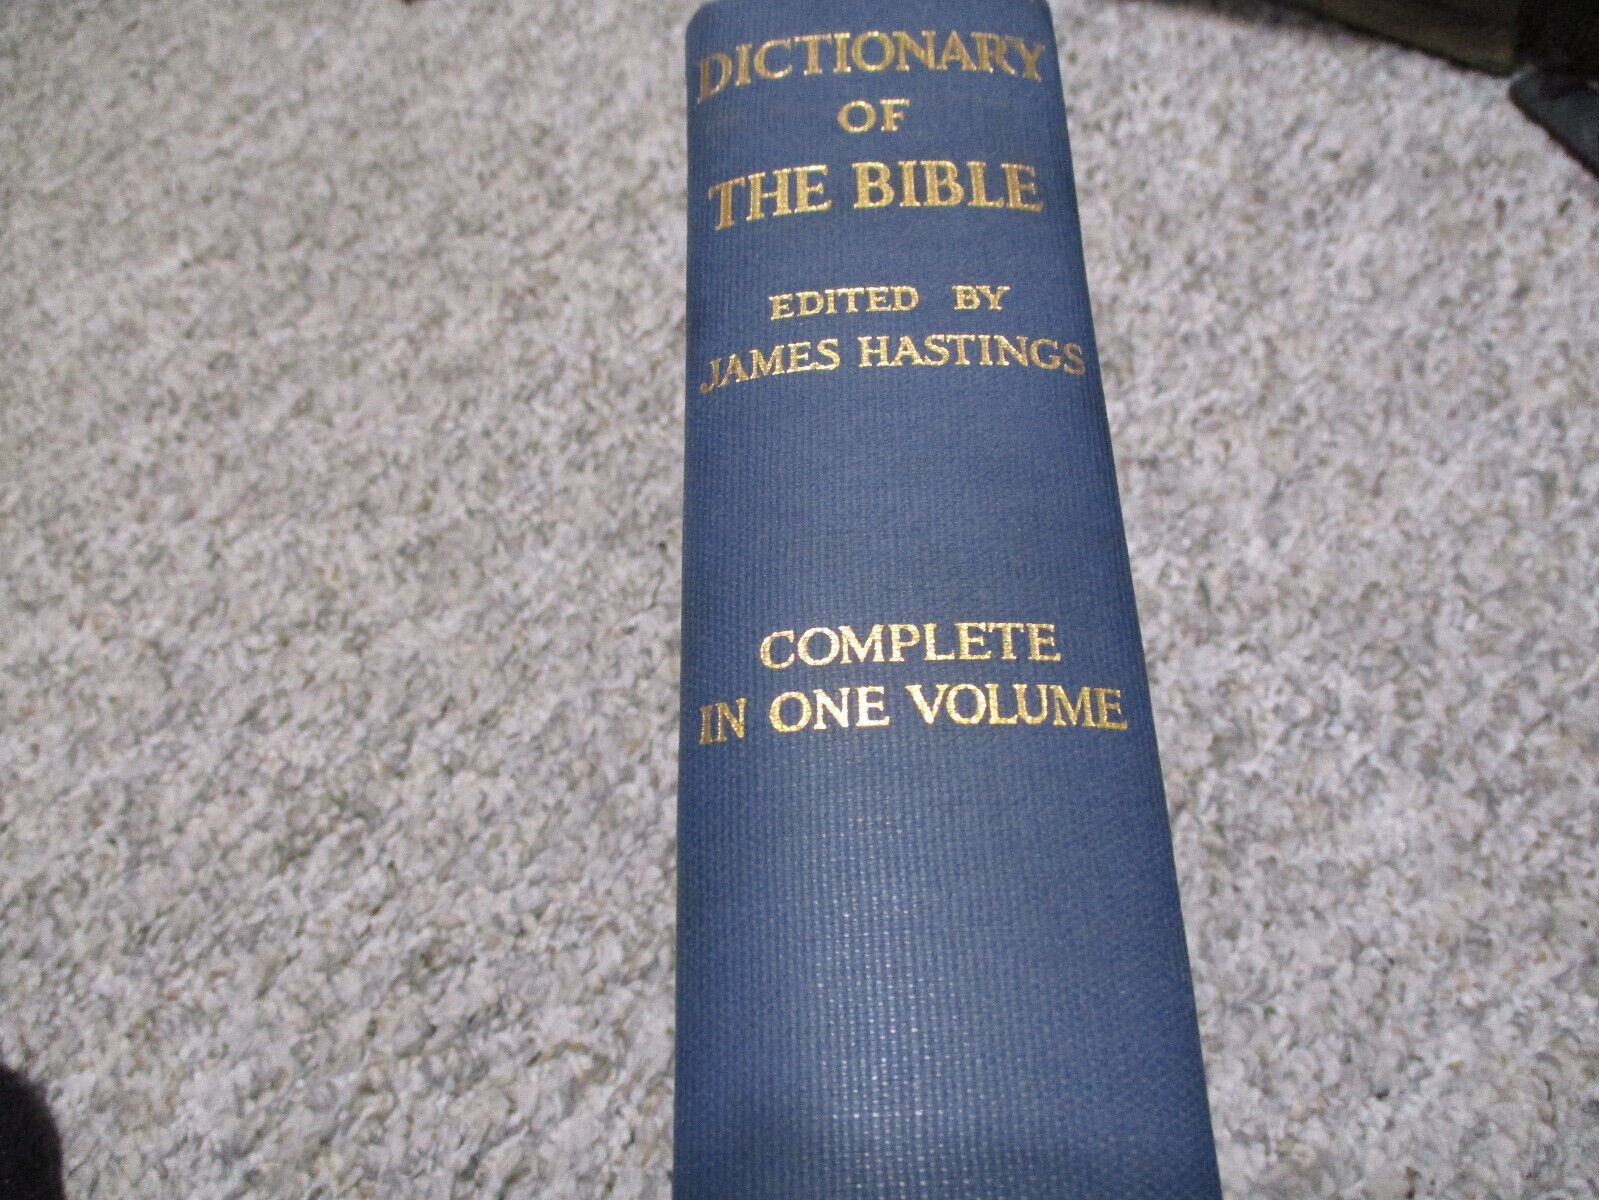 Dictionary of the Bible. Edited by James Hasting. 1943. Complete in One Volume. 